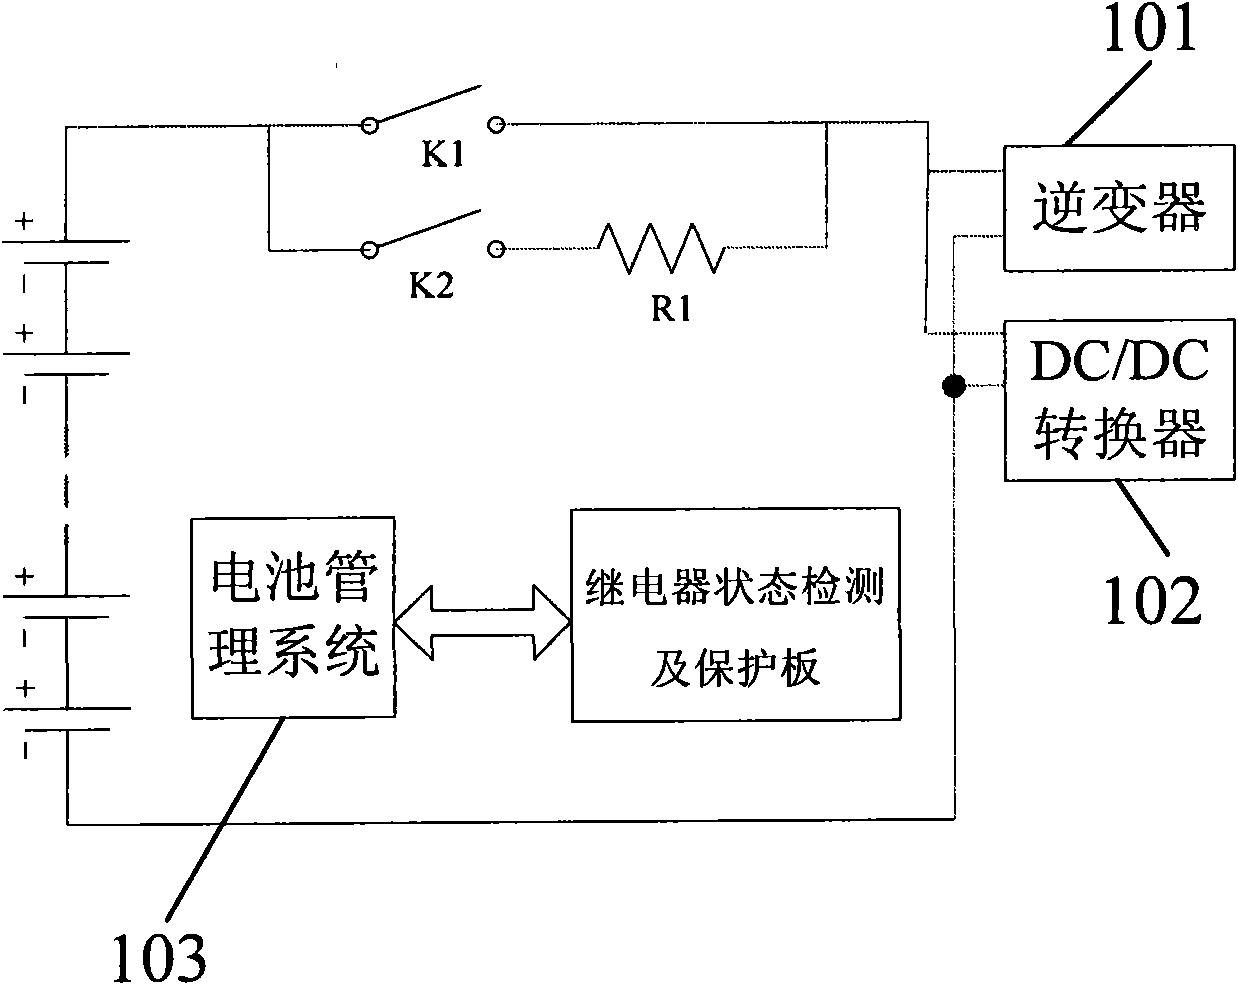 Method and system for protecting electric vehicle pre-charging circuit